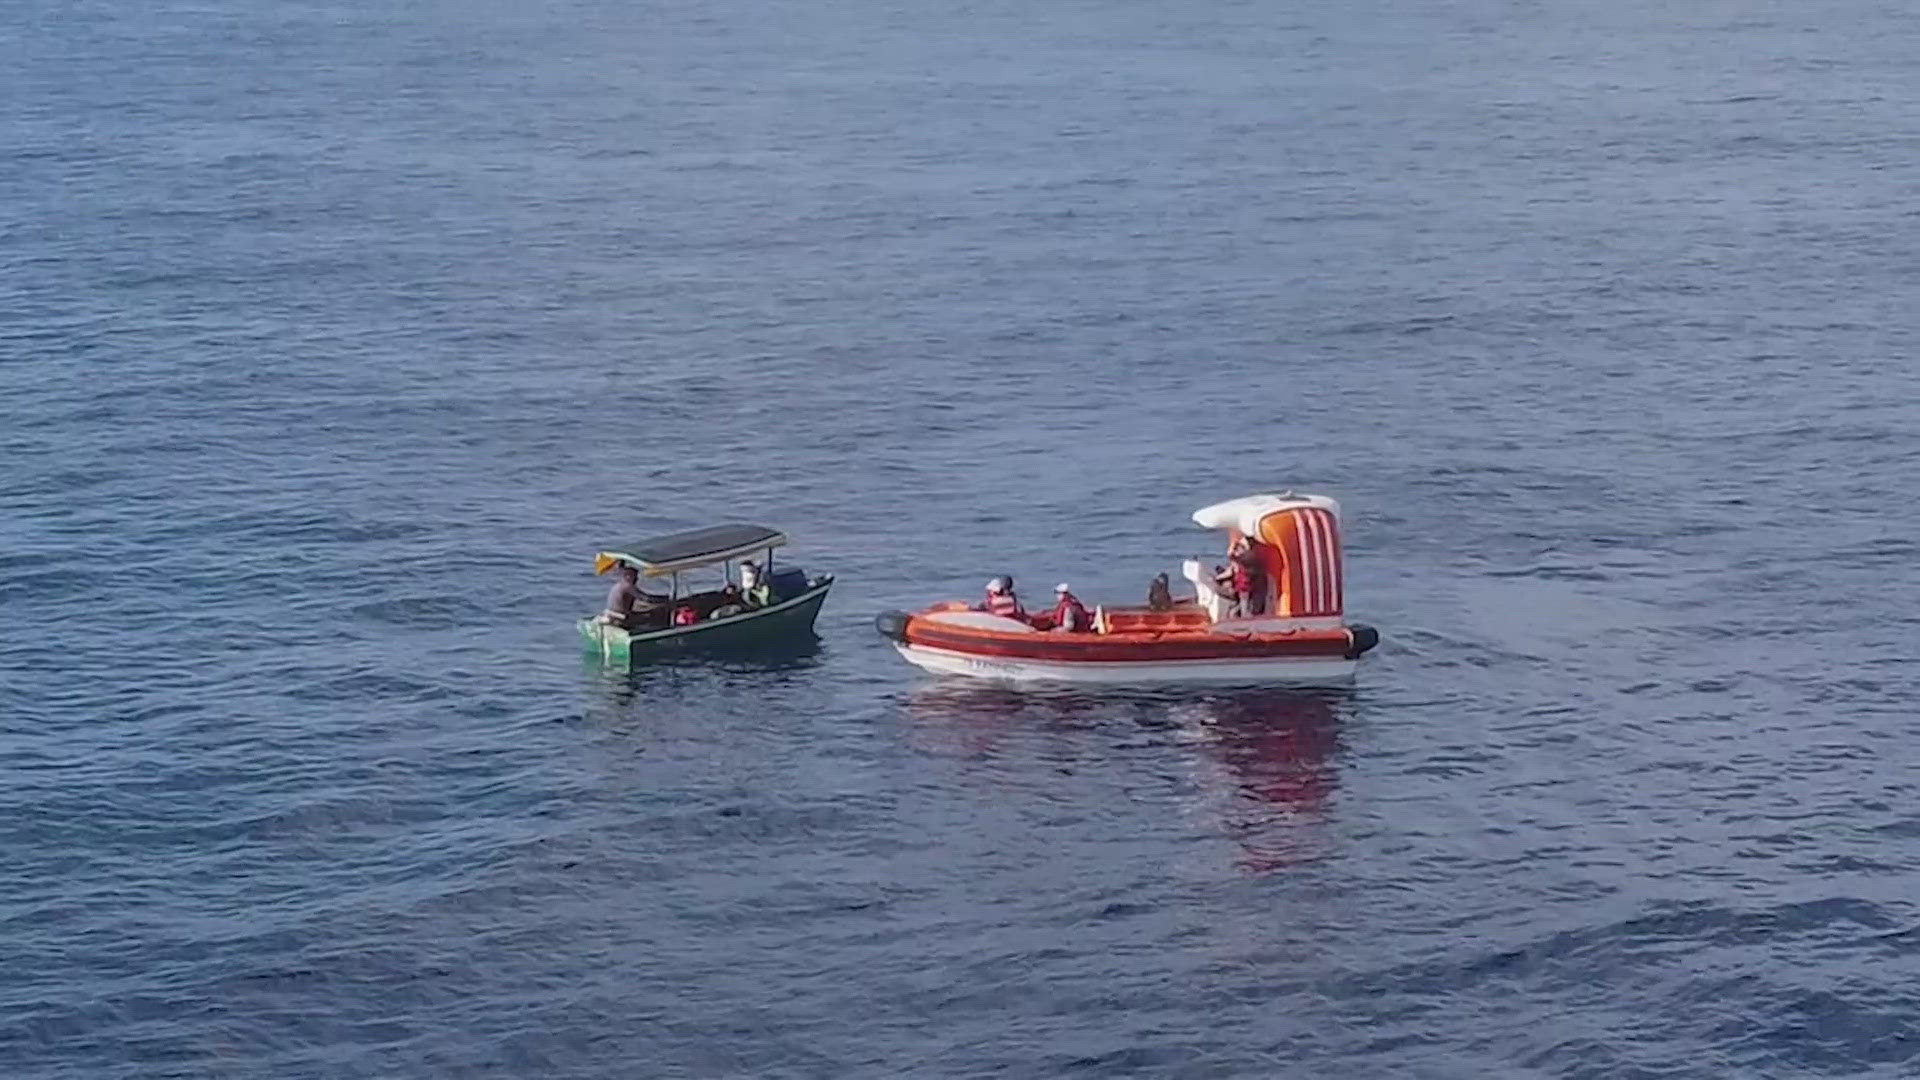 While on their summer sea semester, the students spotted a small fishing boat drifting in the middle of the Gulf of Mexico 500 miles away from Galveston.